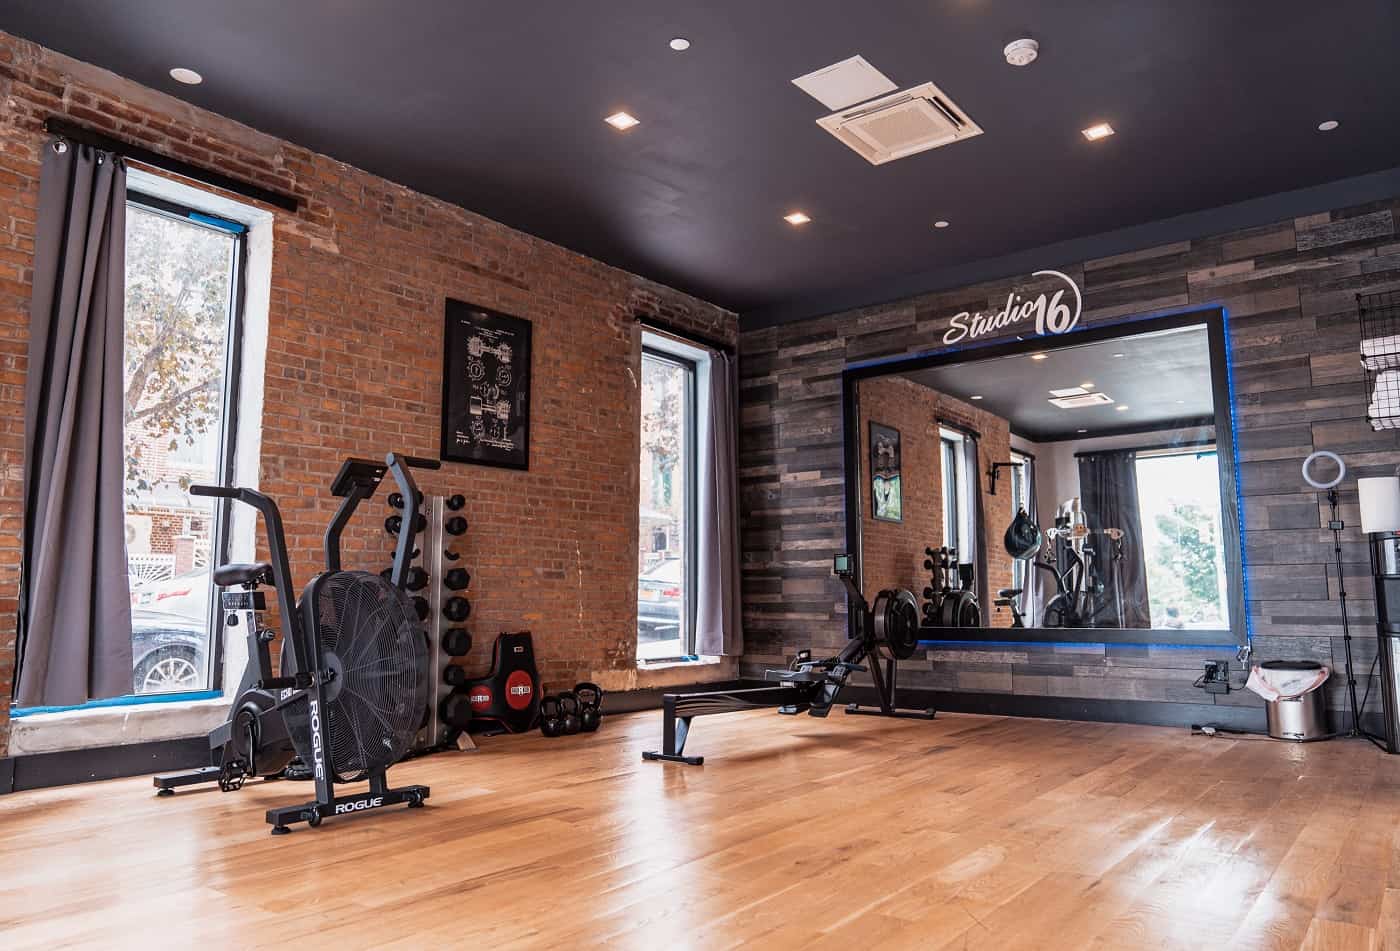 Services Your Fitness Studio Needs that Won't Sweat Your Budget